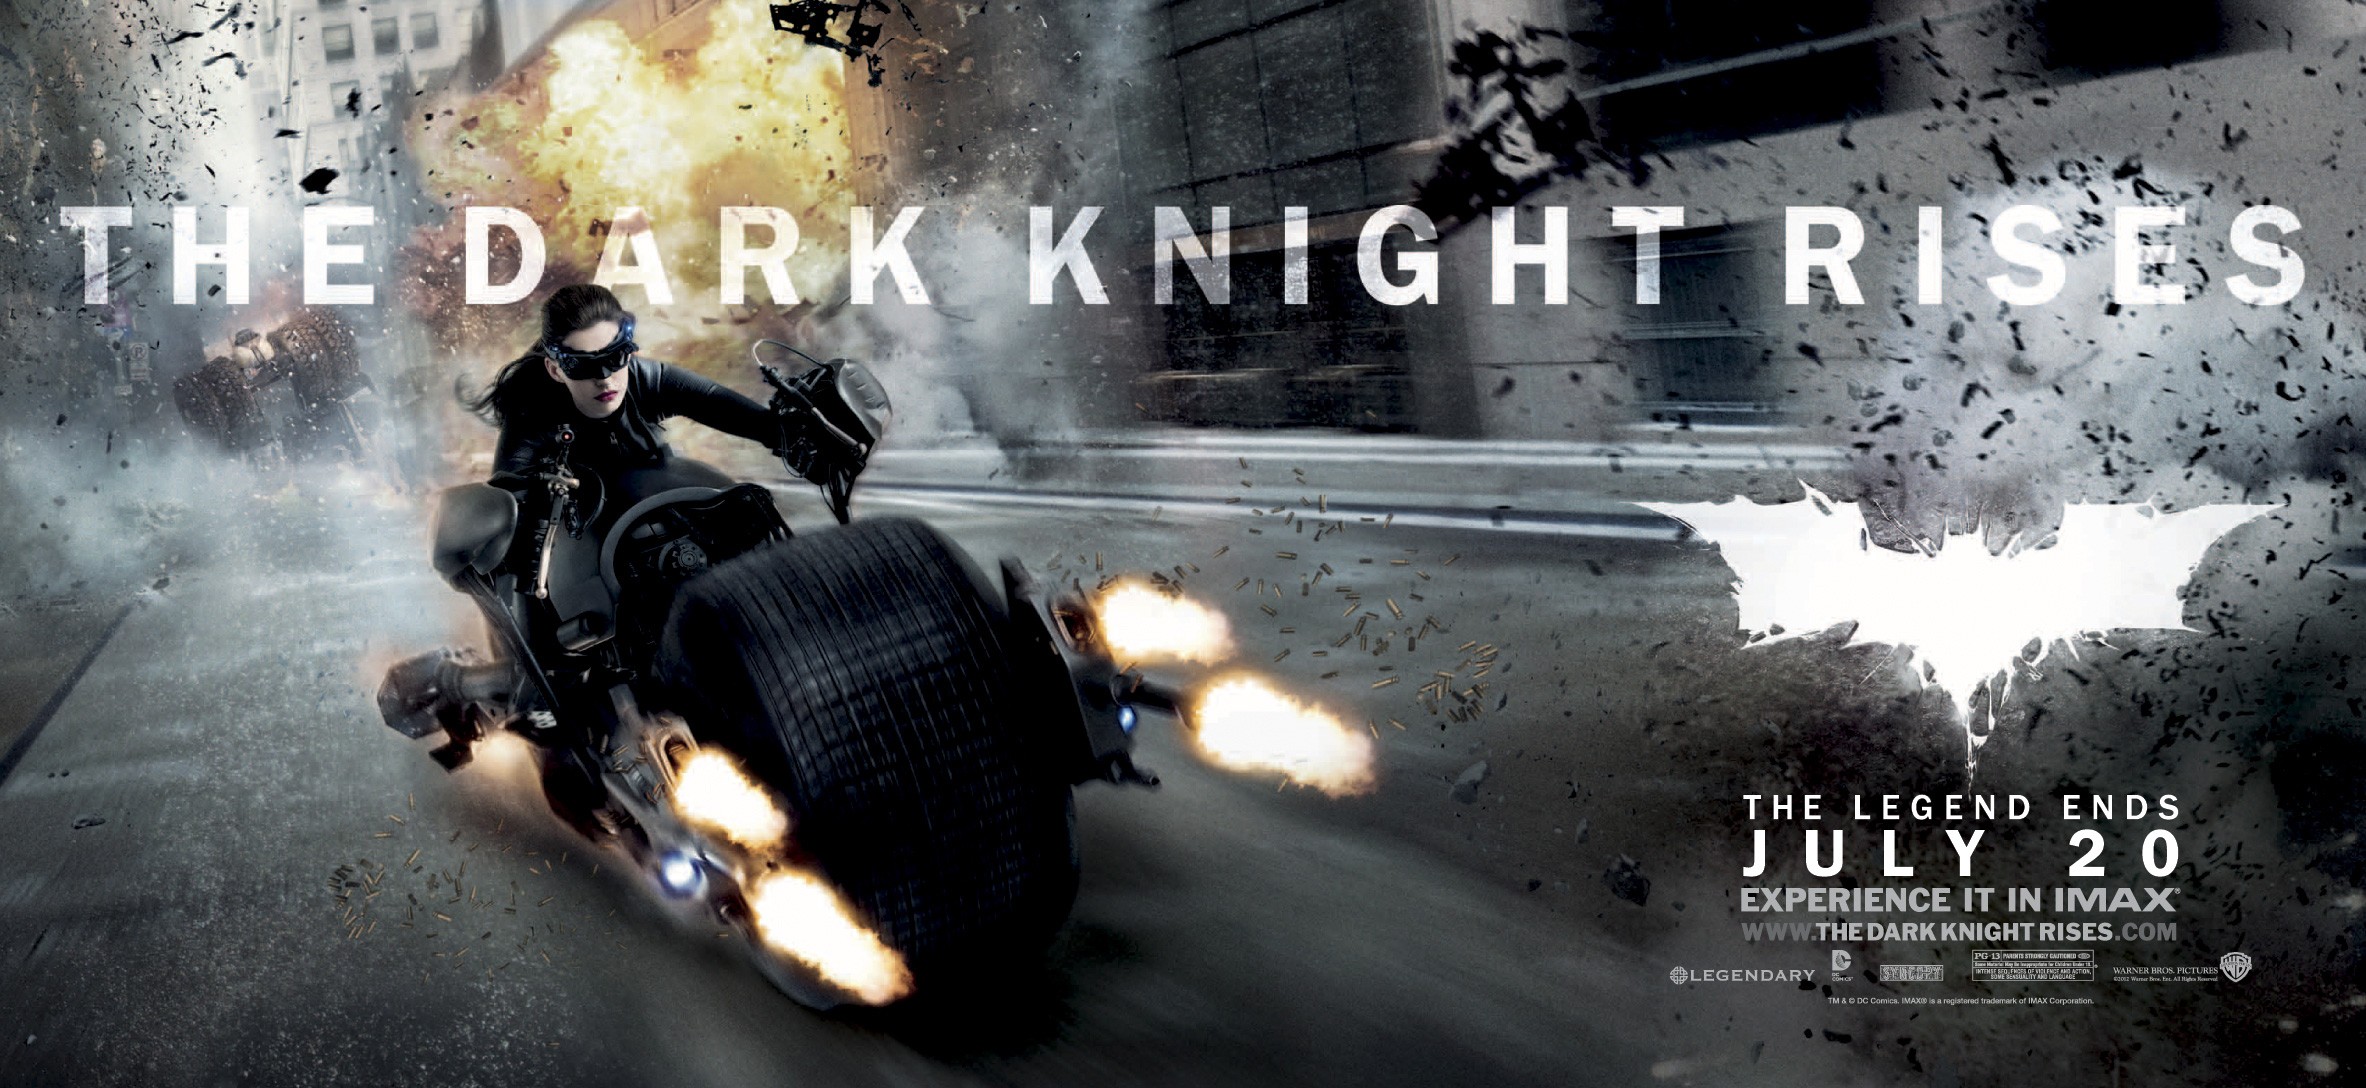 Mega Sized Movie Poster Image for The Dark Knight Rises (#11 of 24)